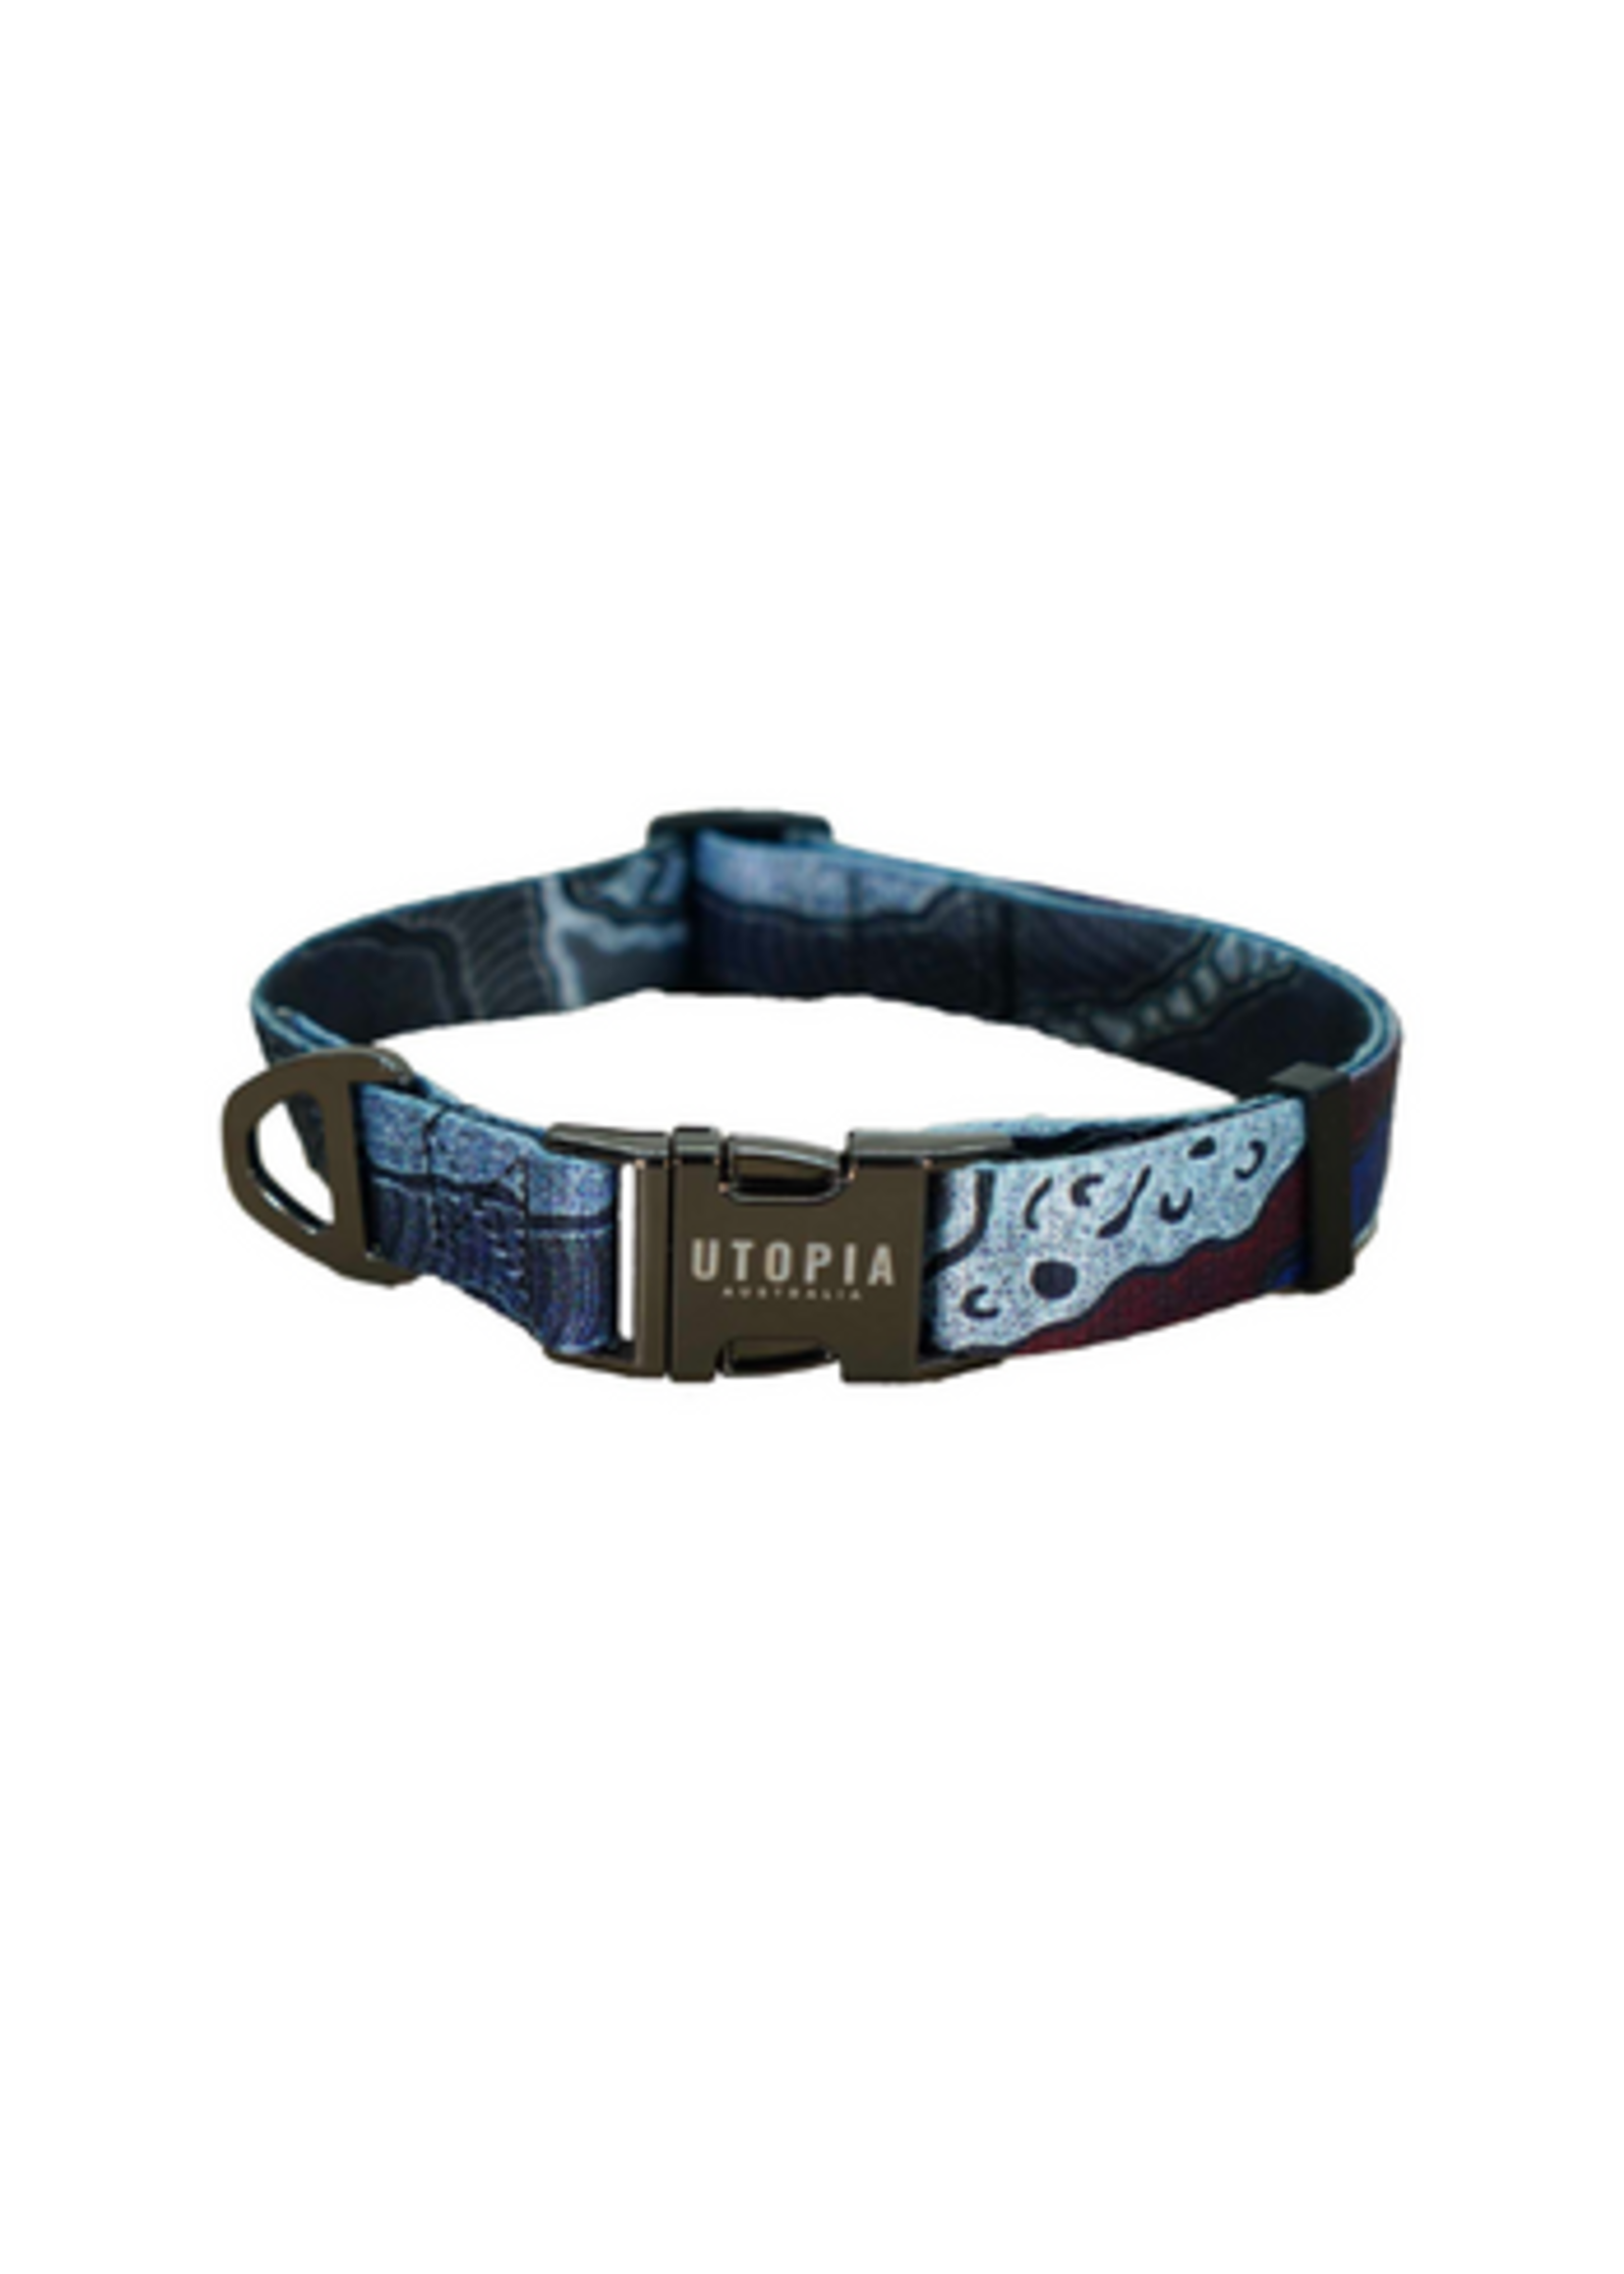 Utopia Dog Collar - Large - Delvine Petyarre - My Country (SDCL217)